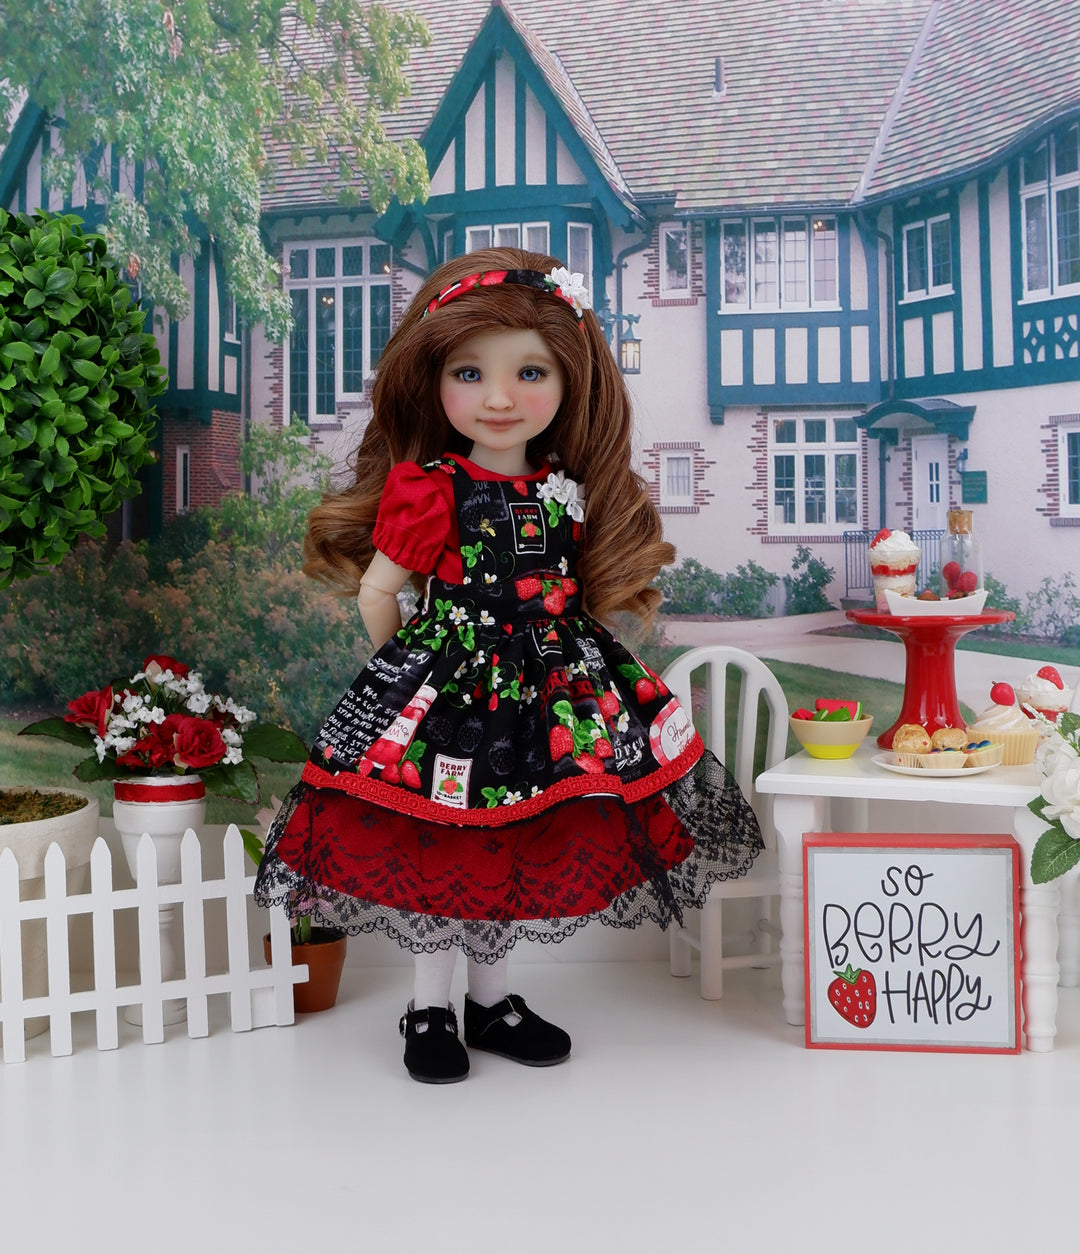 Strawberry Jam - dress & apron with shoes for Ruby Red Fashion Friends doll